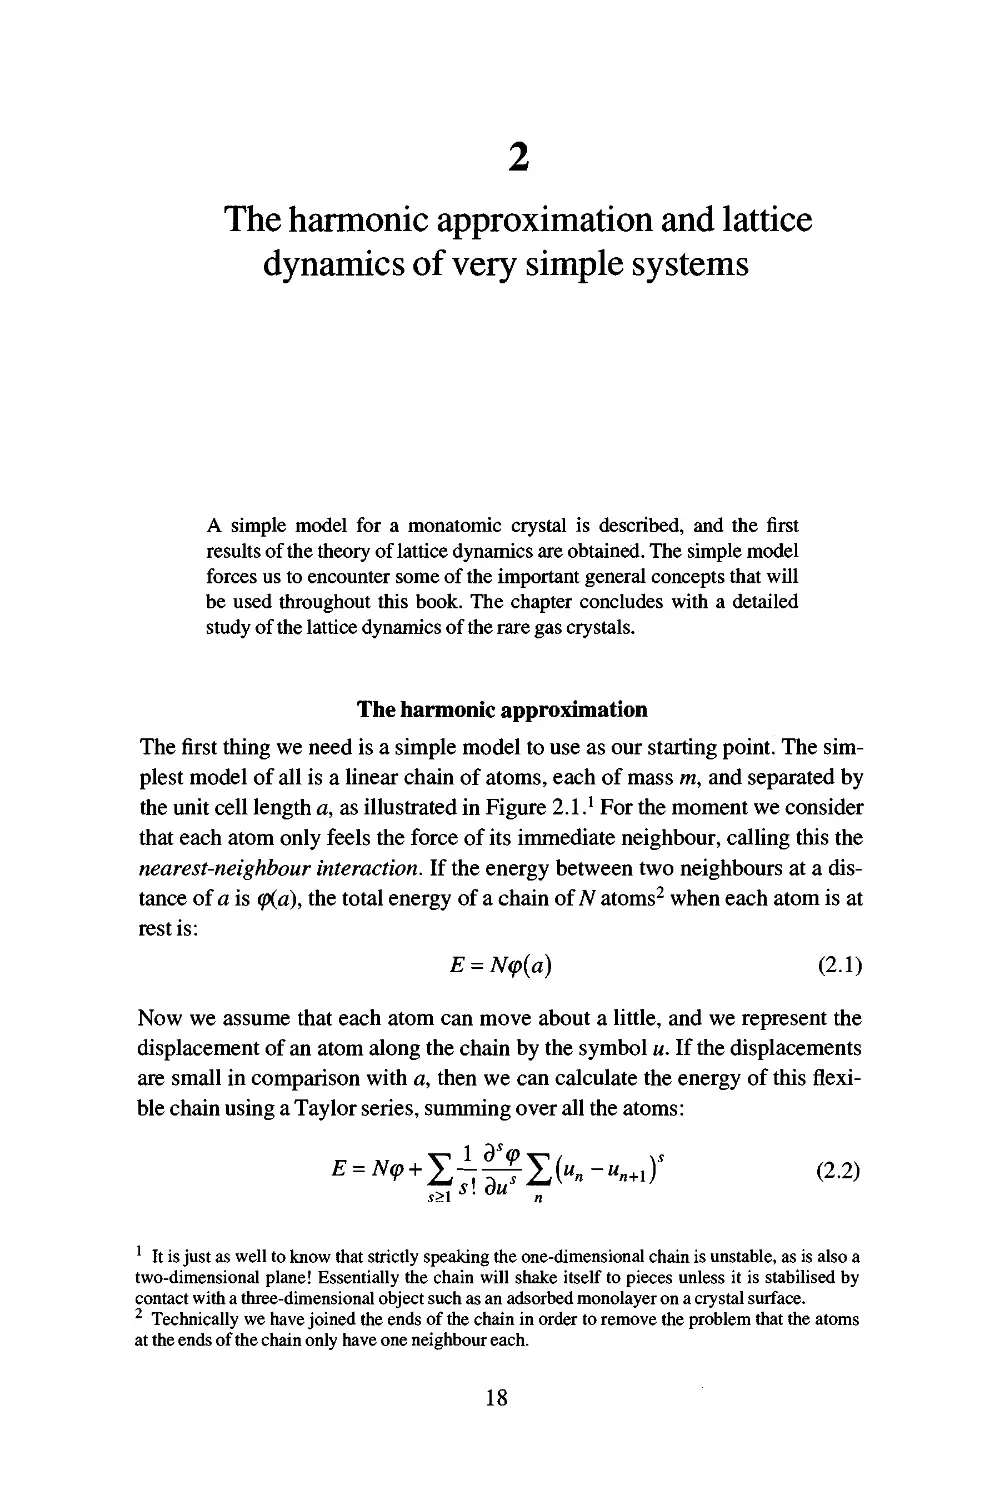 The harmonic approximation and lattice dynamics of very simple systems